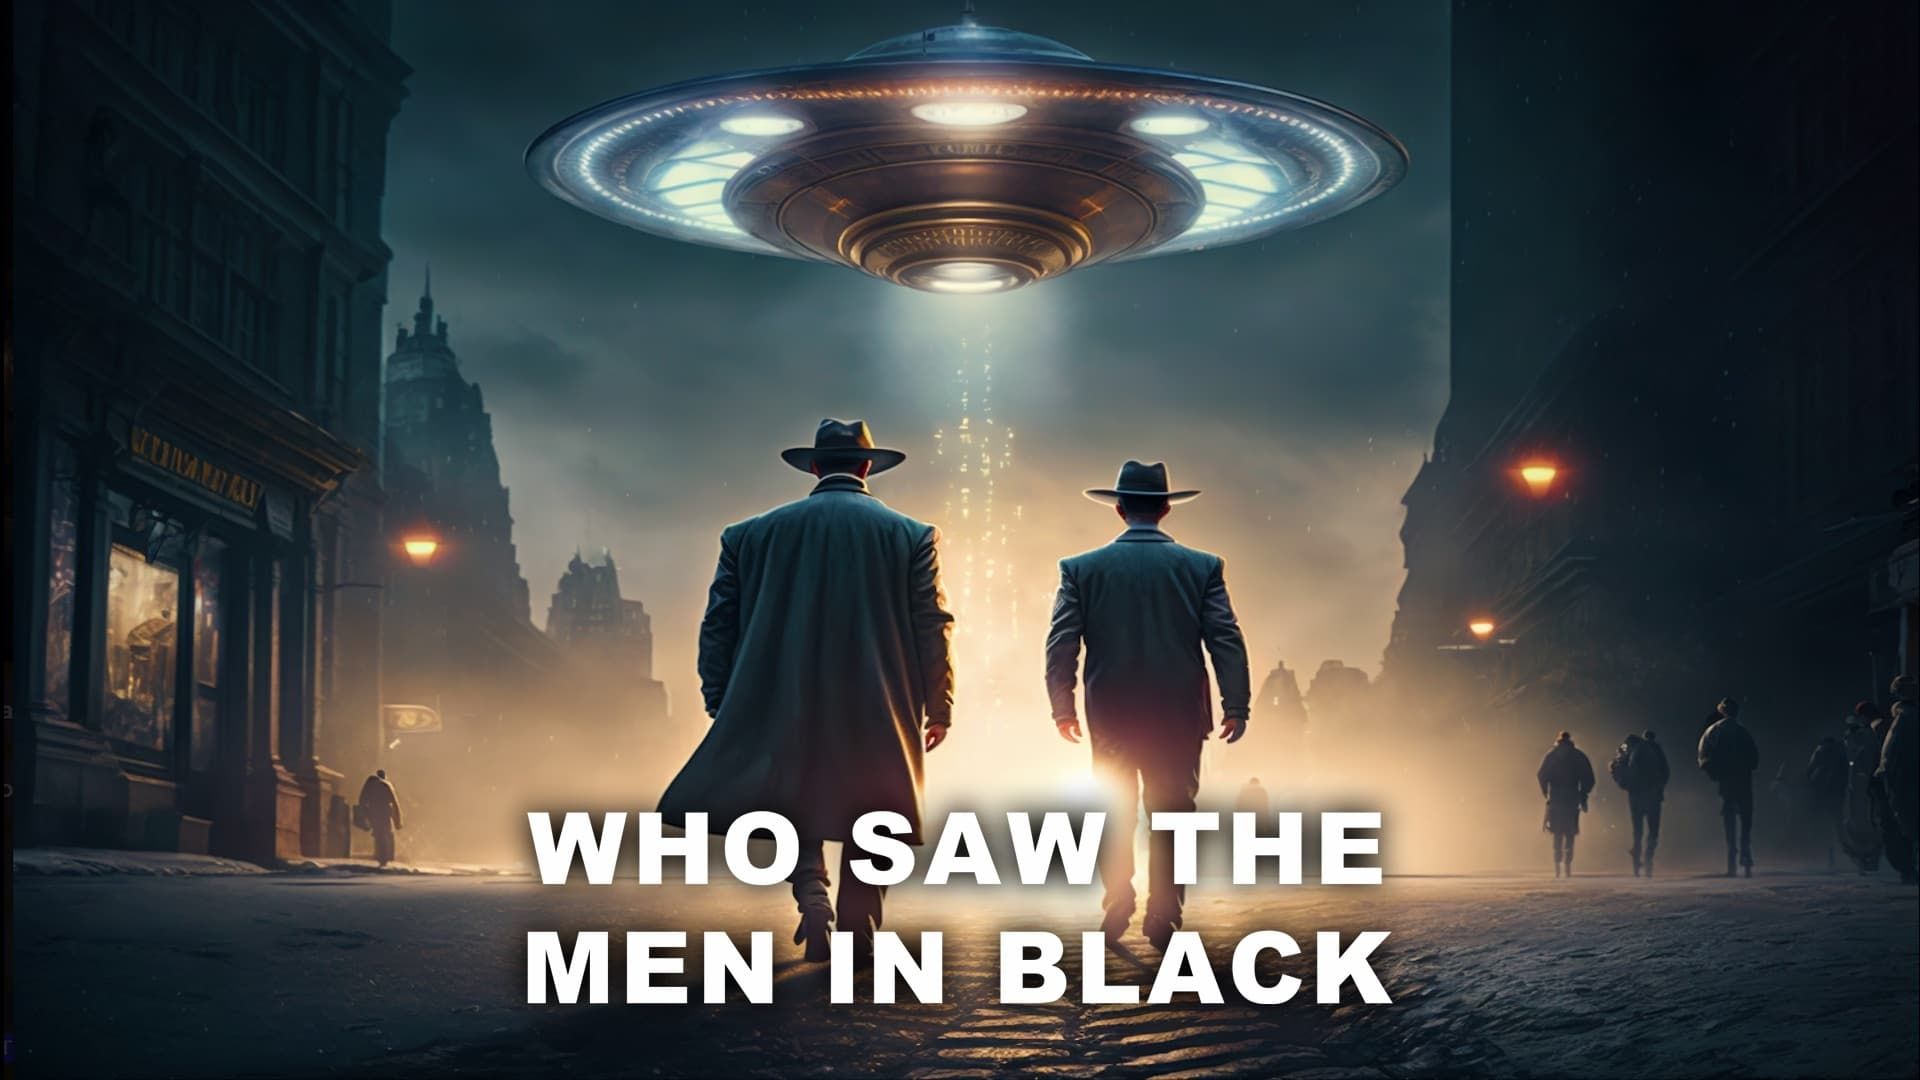 Who Saw the Men in Black background